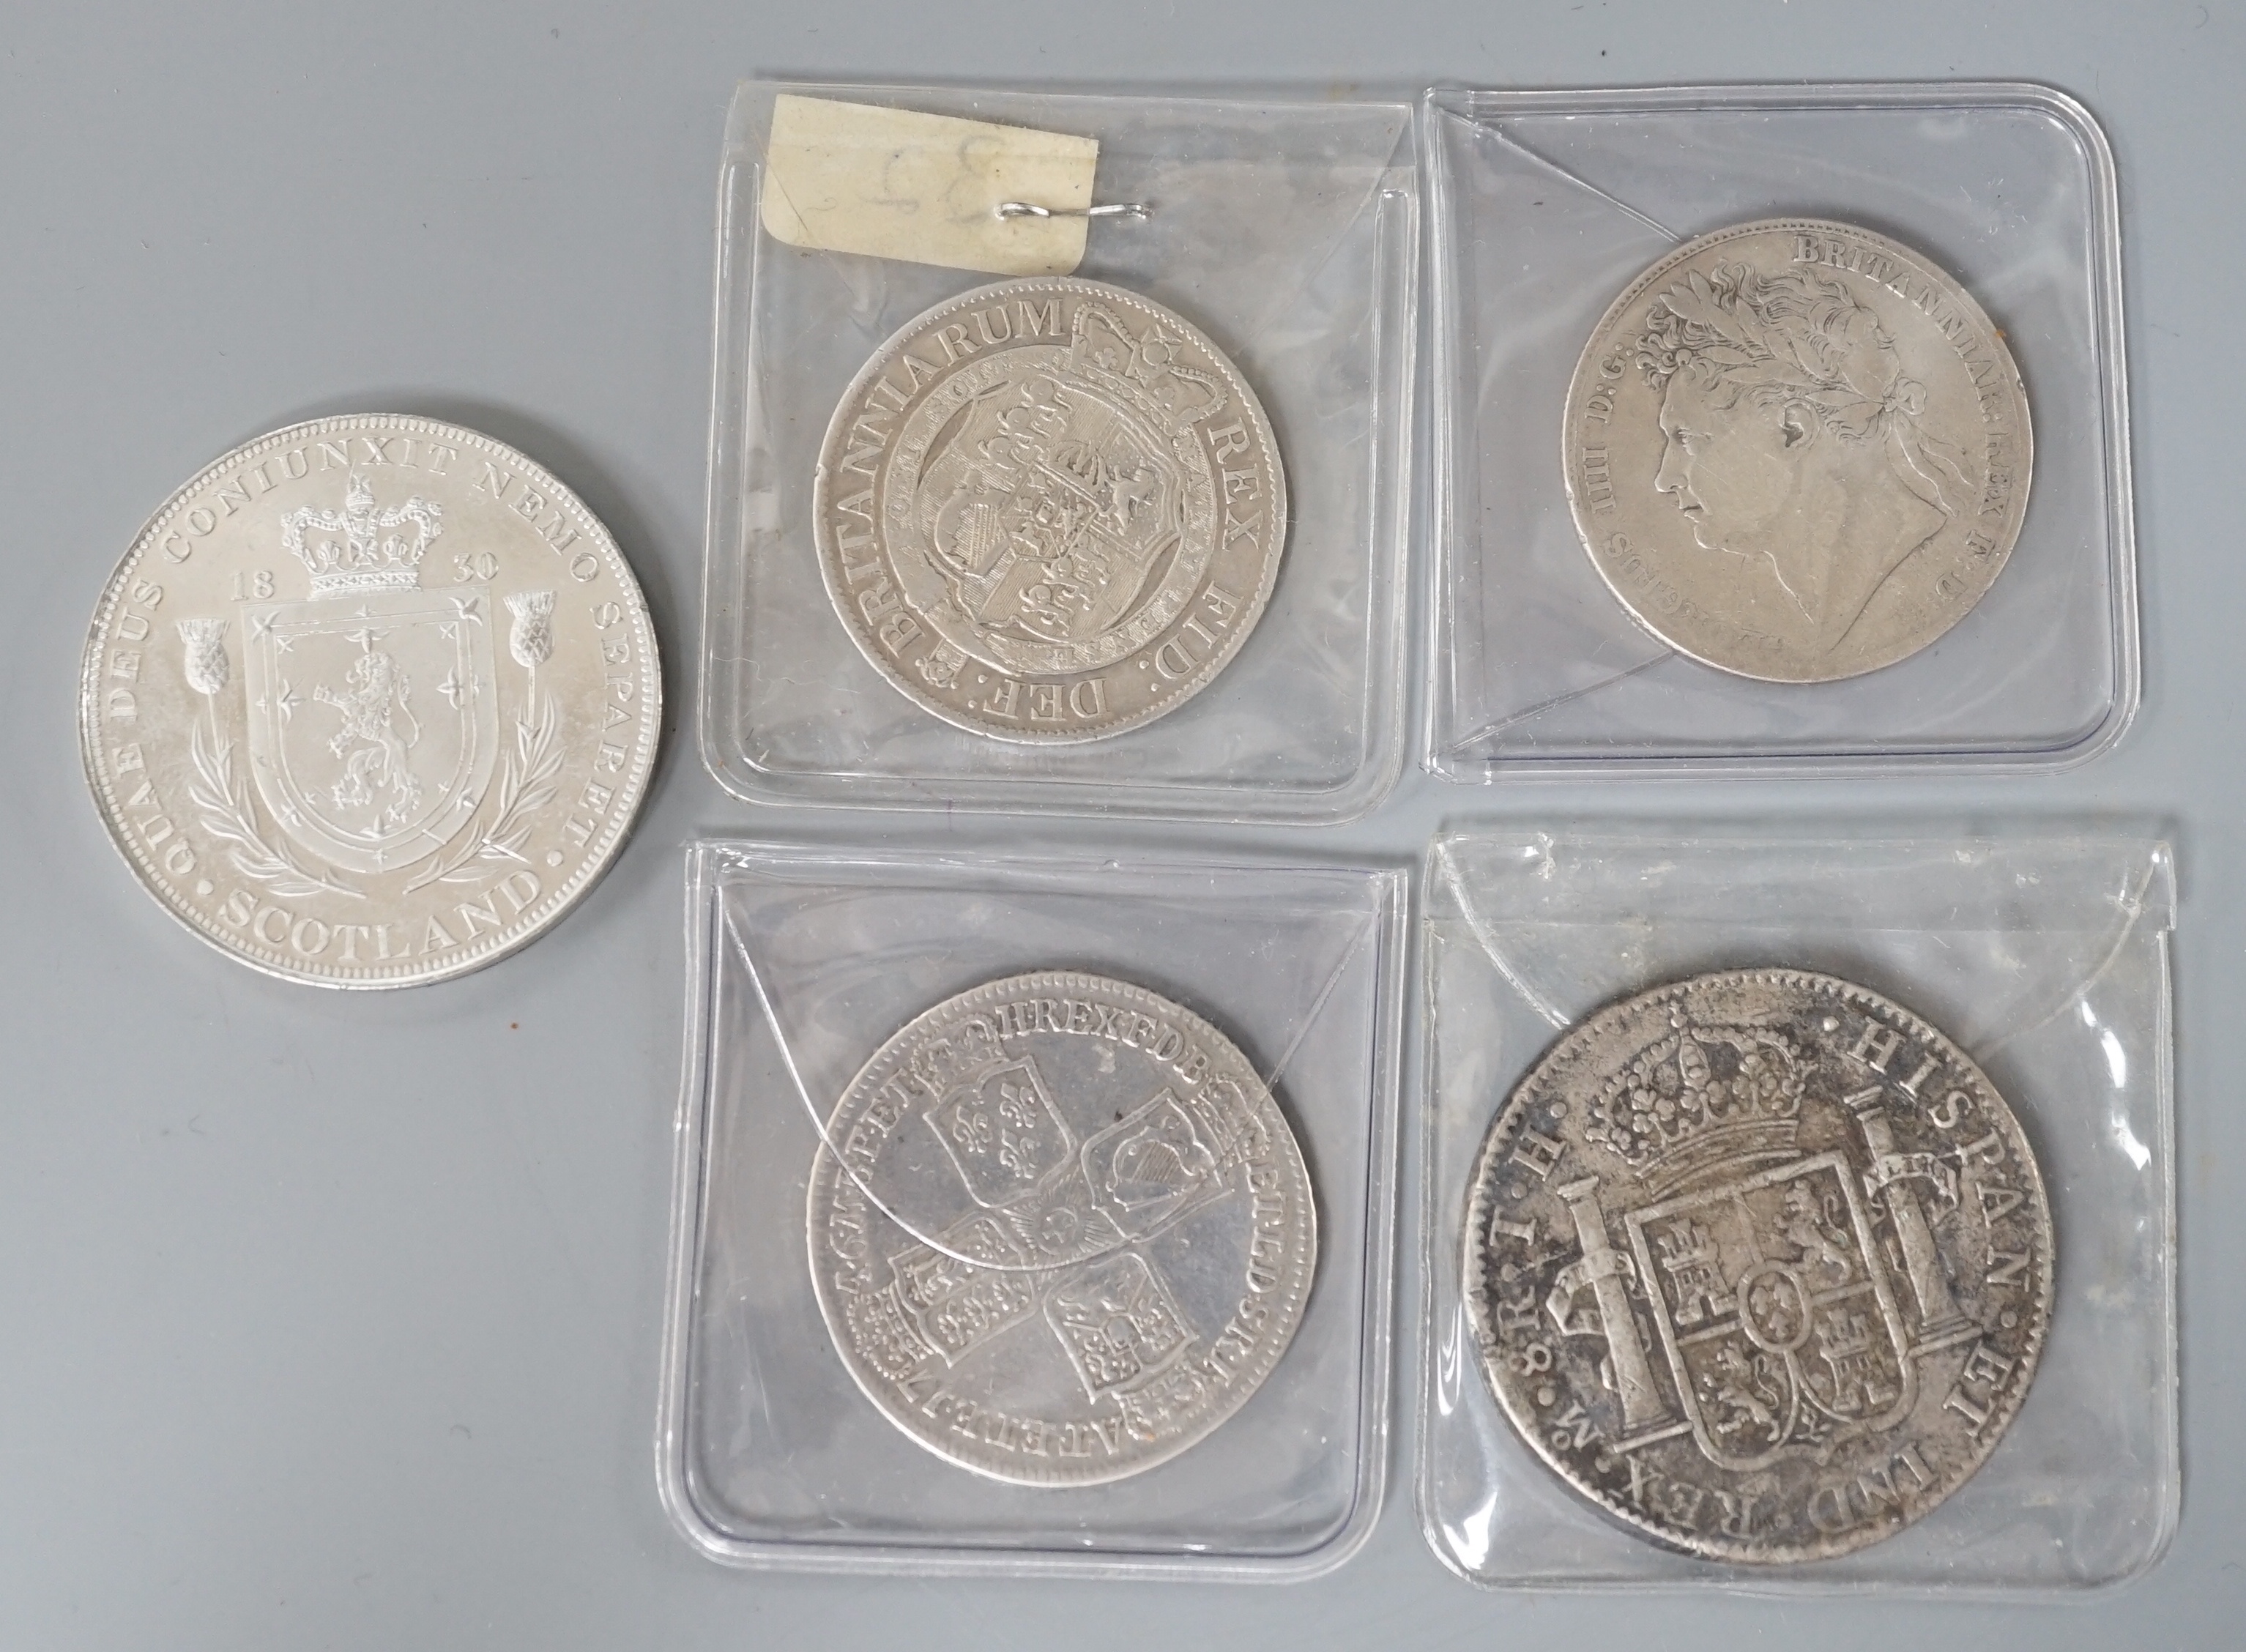 Three Georgian half crowns; 1746, 1818 & 1823 and two other coins.